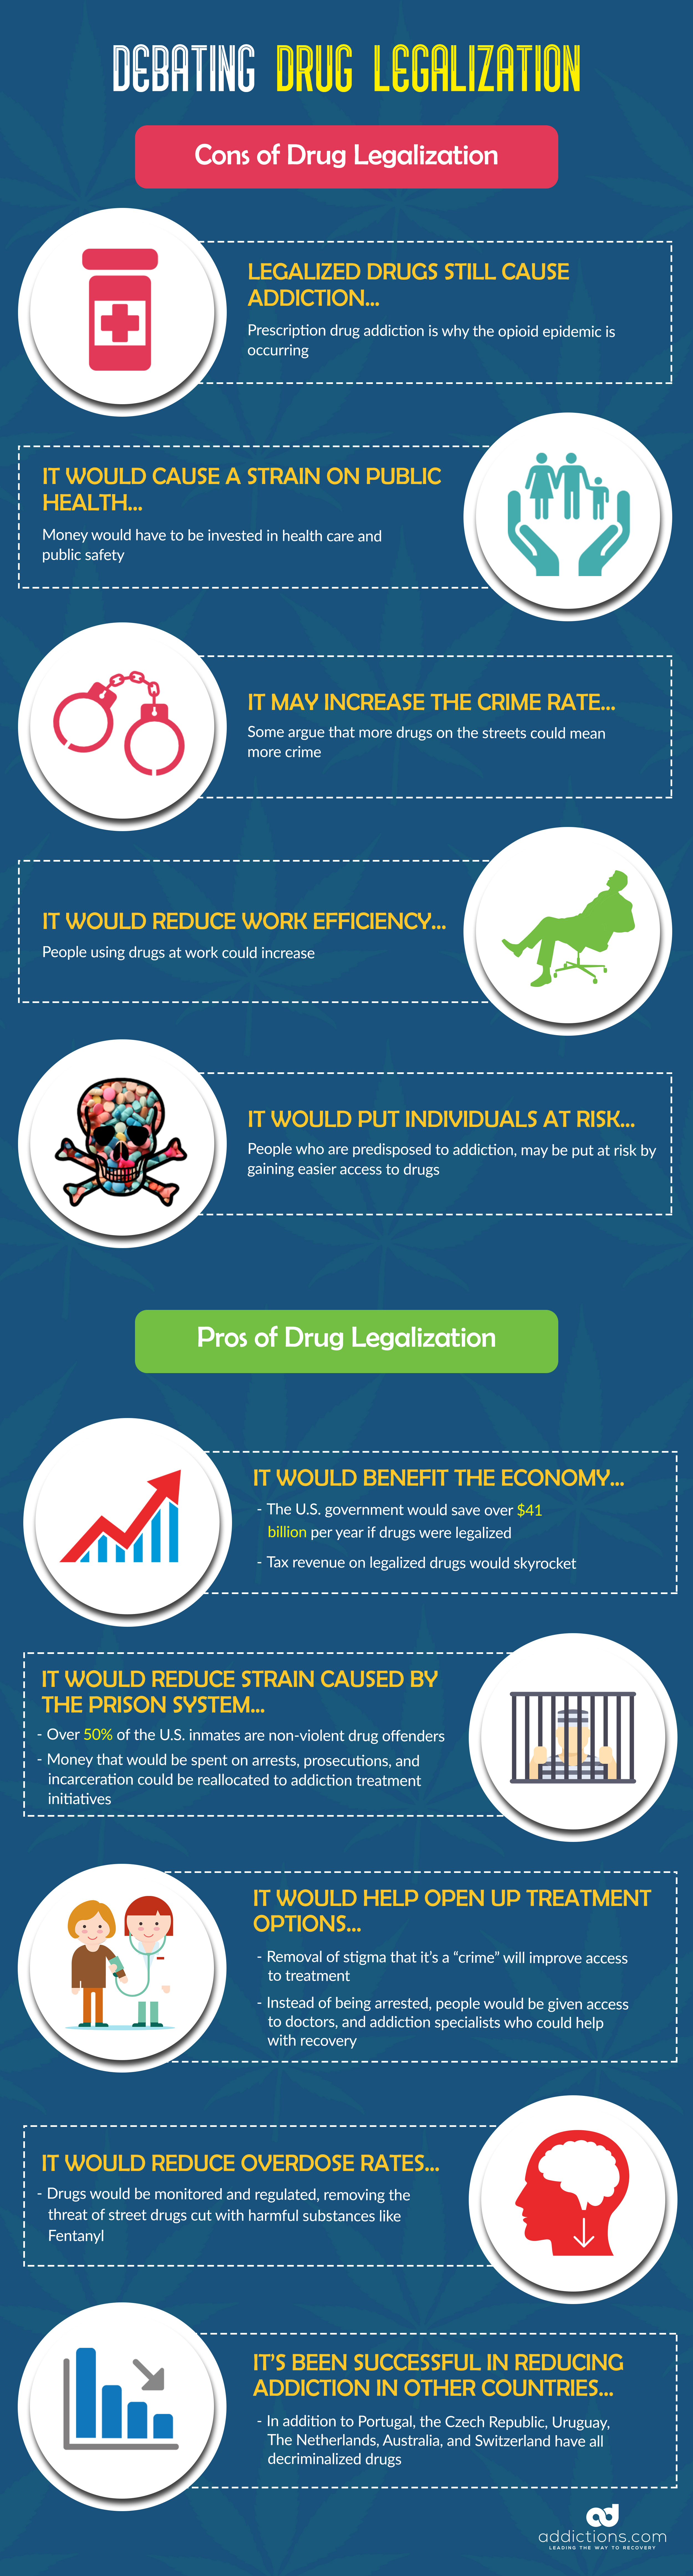 Arguments Against The Legalization Of Drugs